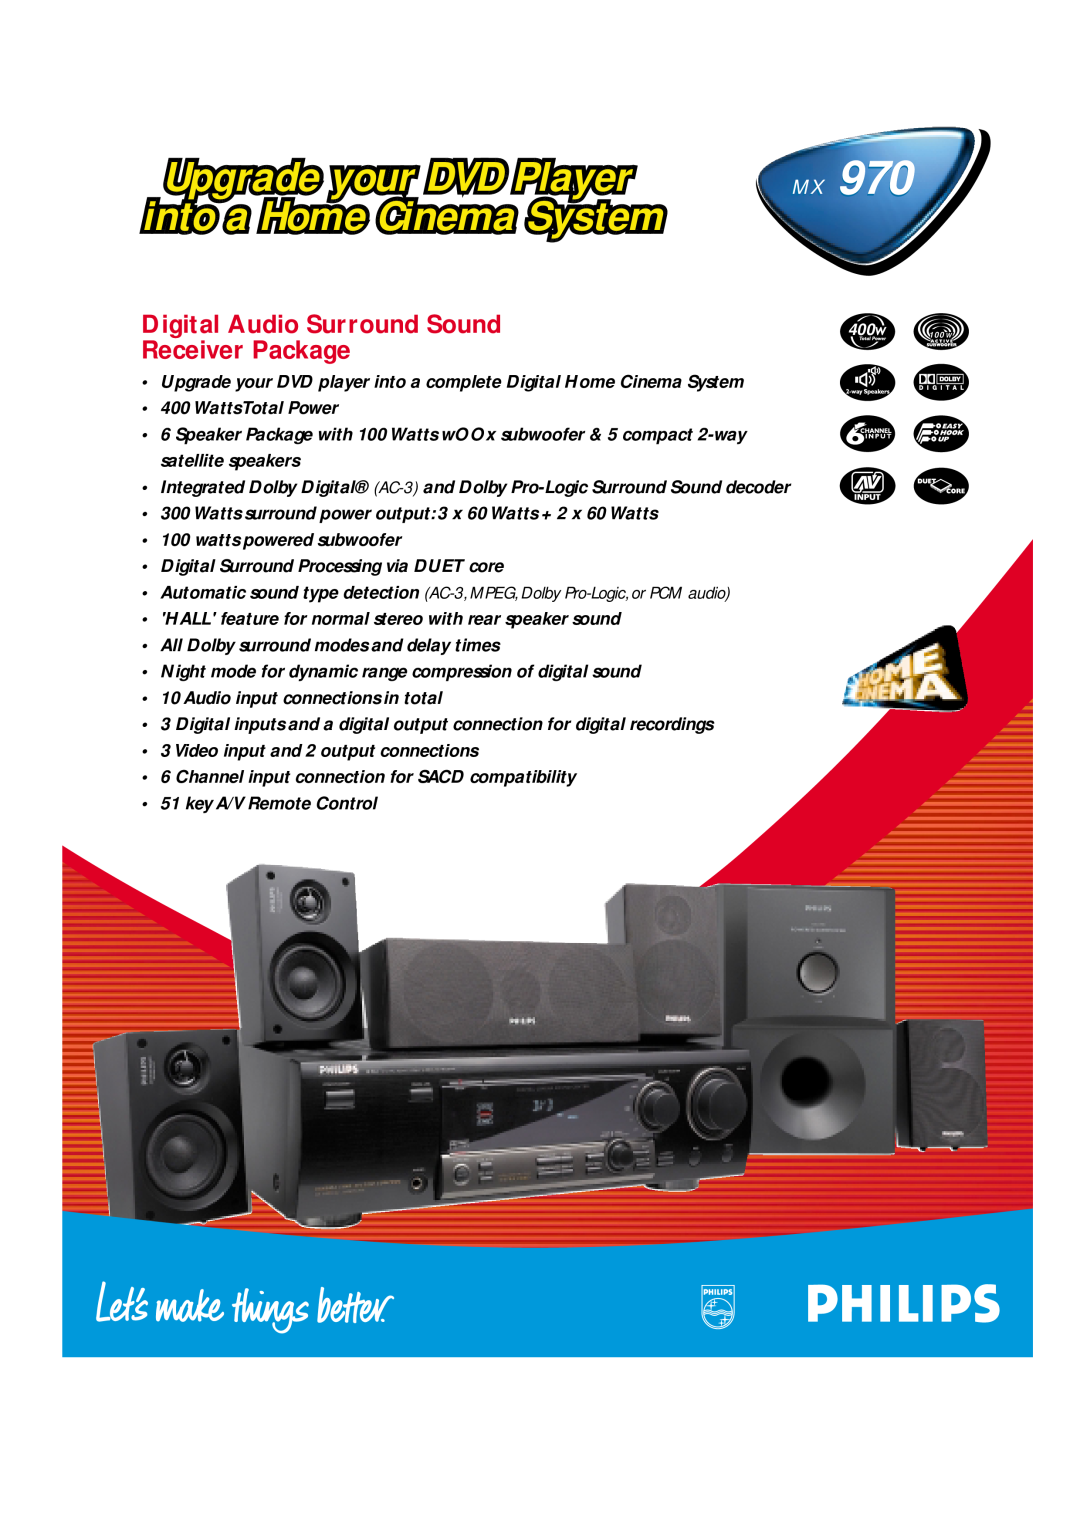 Philips MX970 manual Upgrade your DVD Player, into a Home Cinema System, Digital Audio Surround Sound Receiver Package 